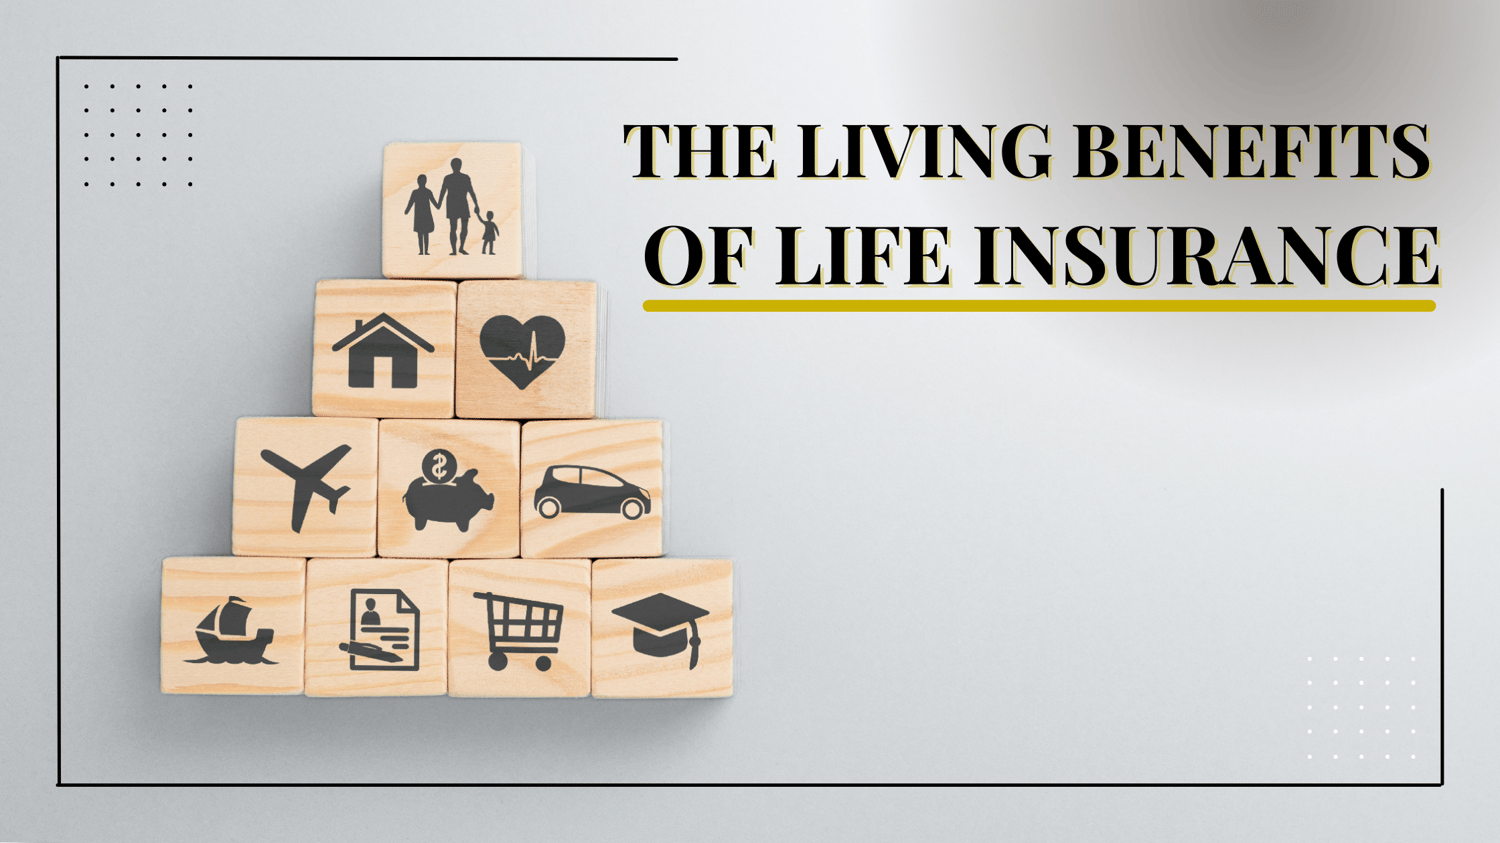 THE LIVING BENEFITS OF LIFE INSURANCE